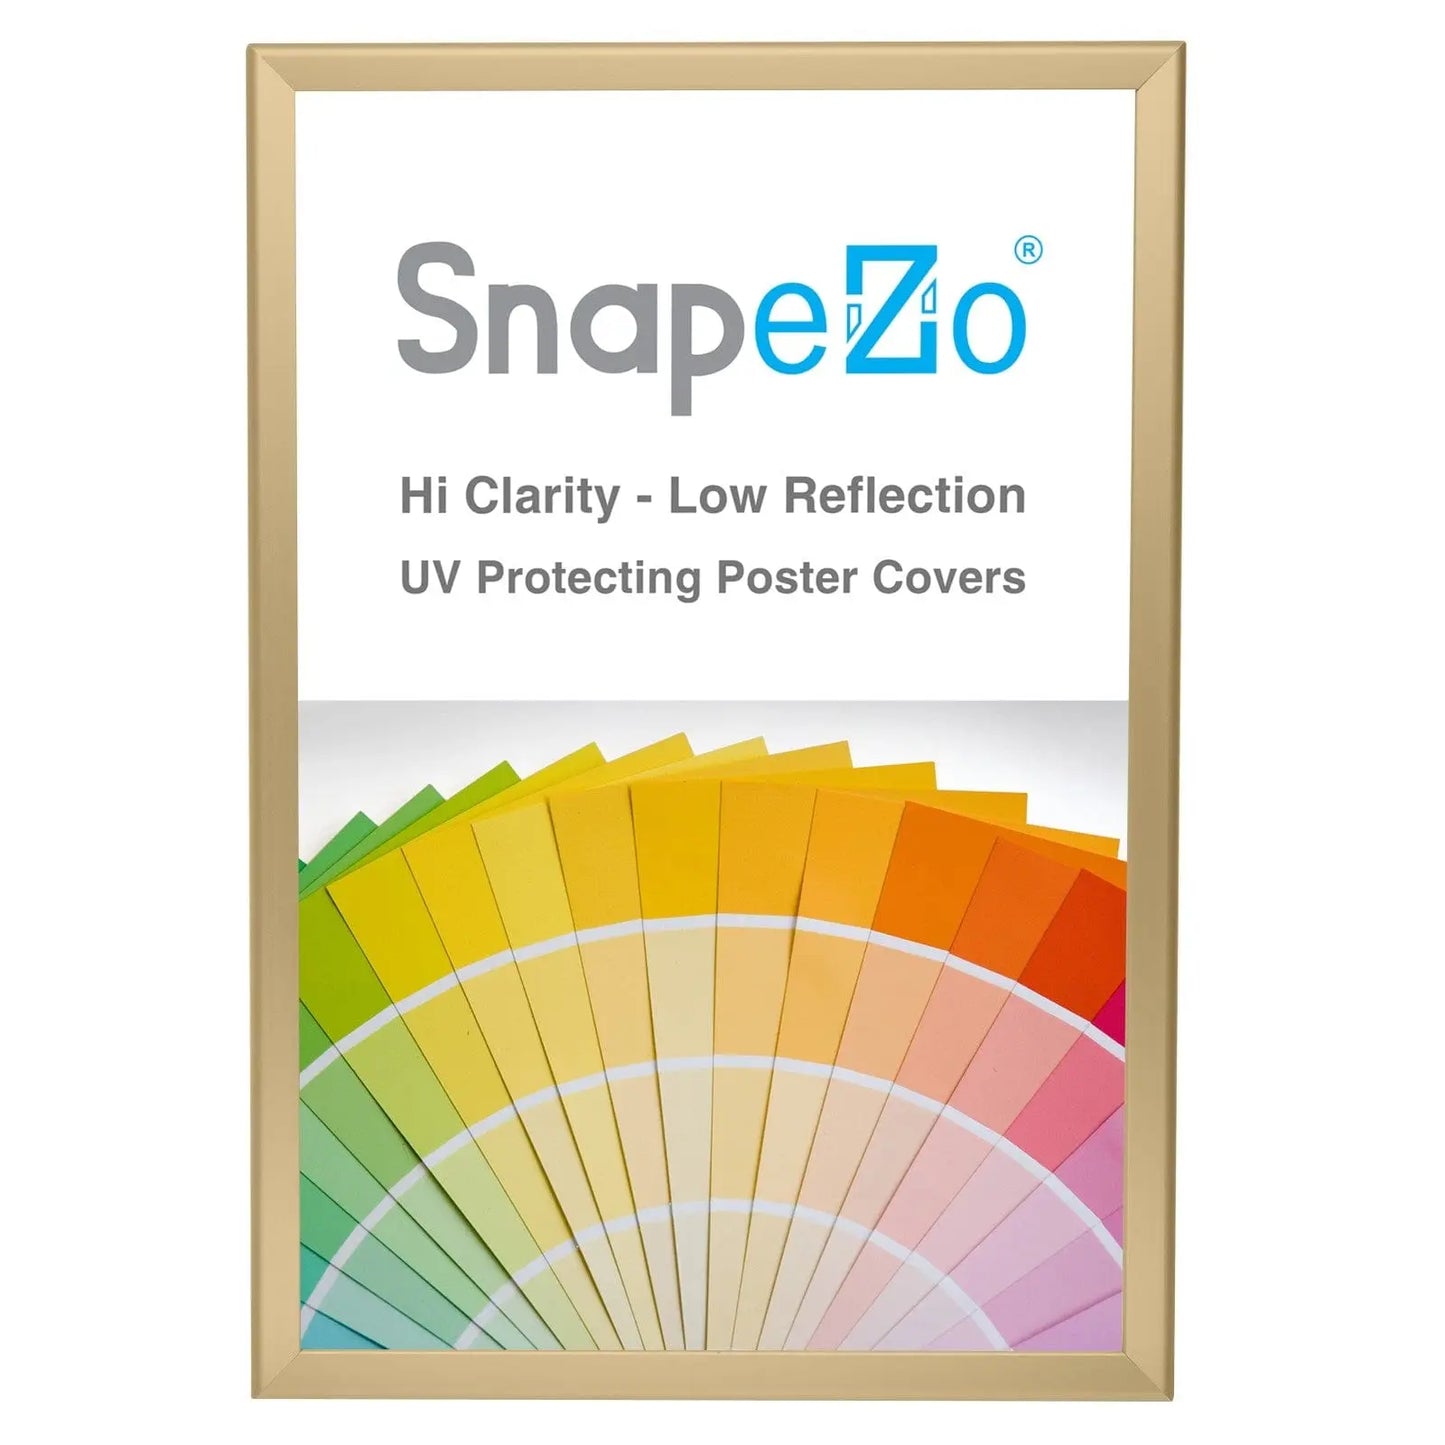 20x30 Gold SnapeZo® Snap Frame - 1.25" Profile - Snap Frames Direct